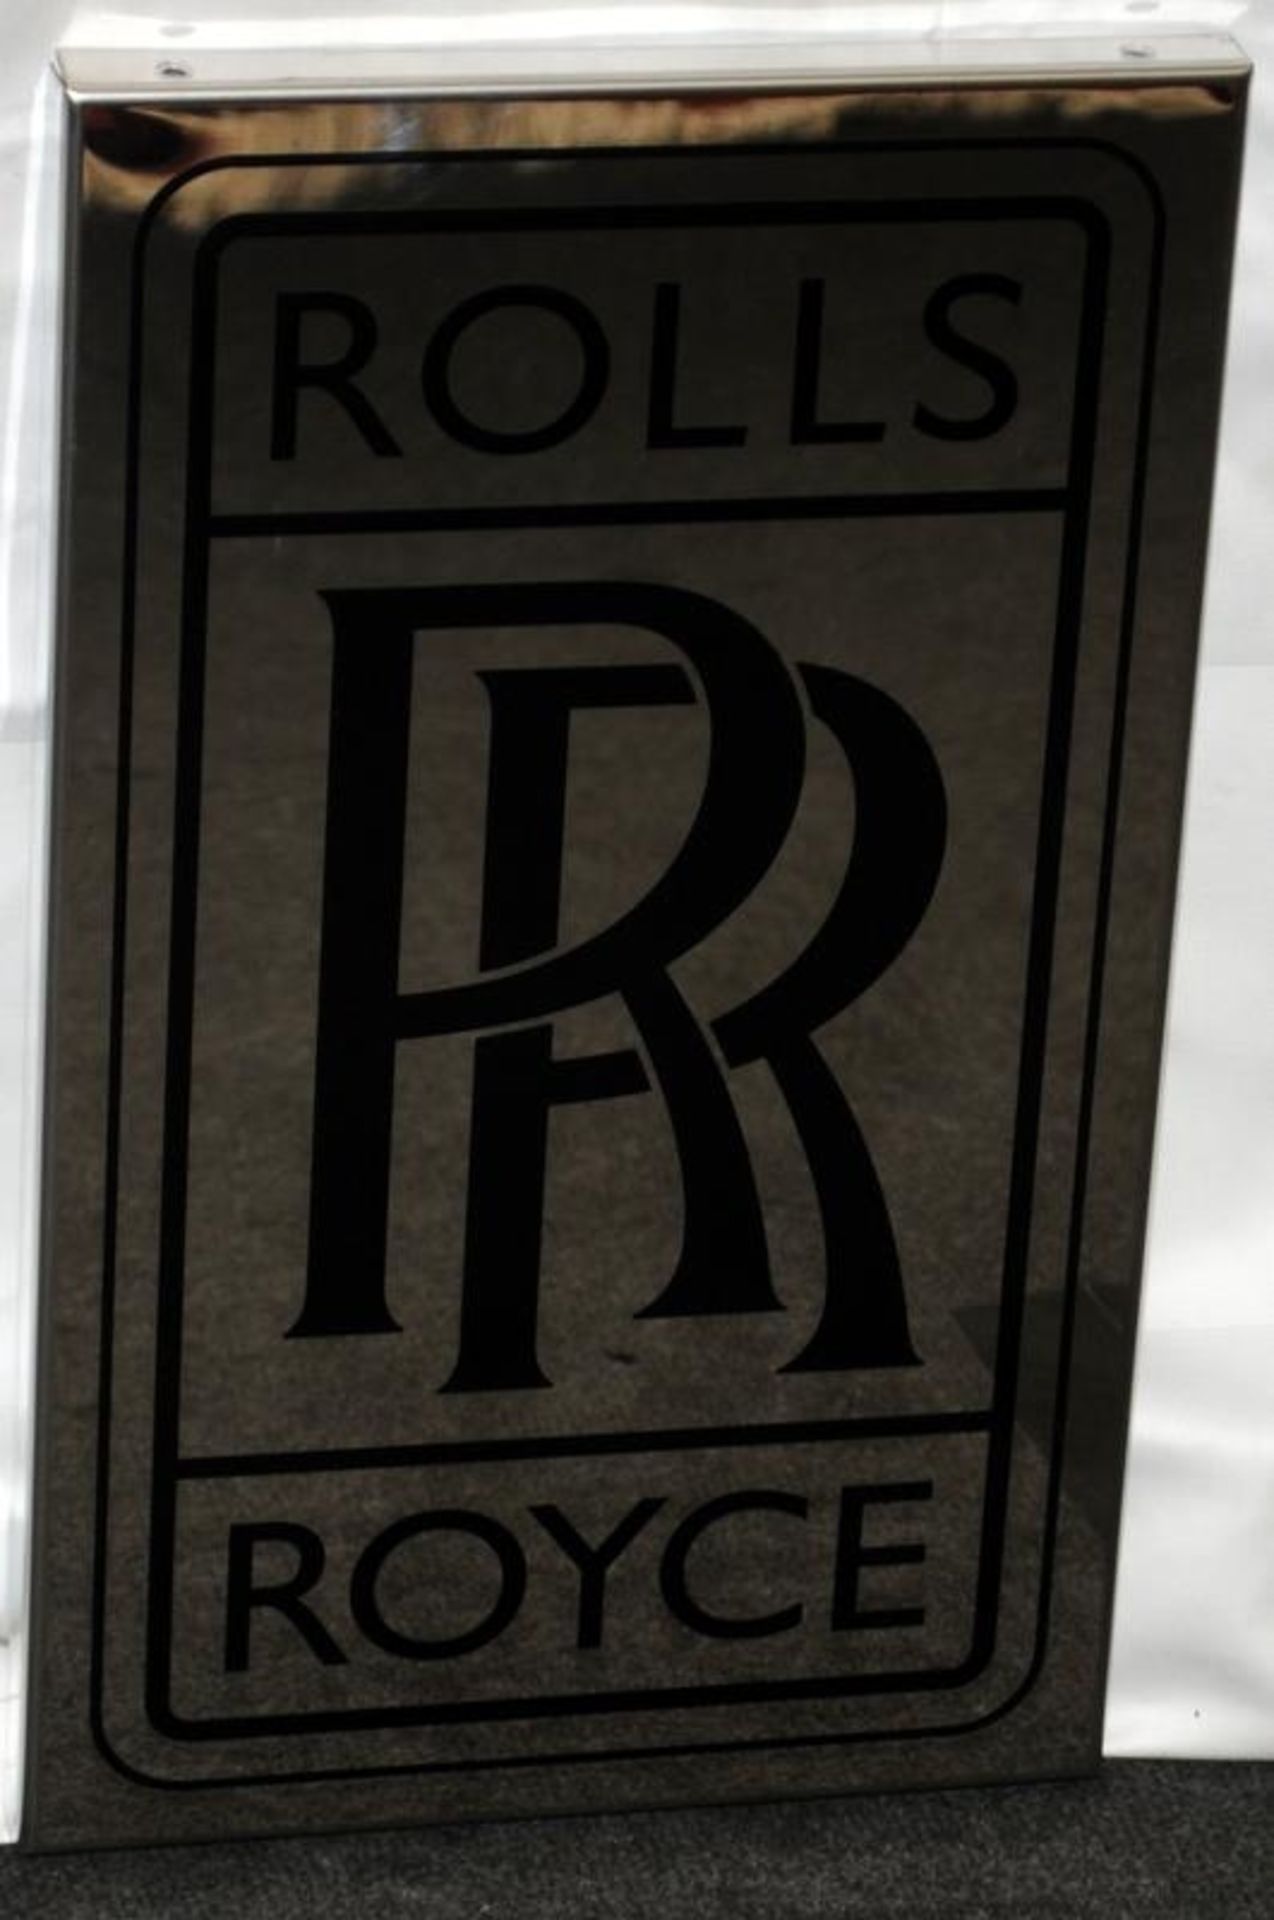 Stainless steel contemporary Rolls Royce advertising sign 27x44cm.